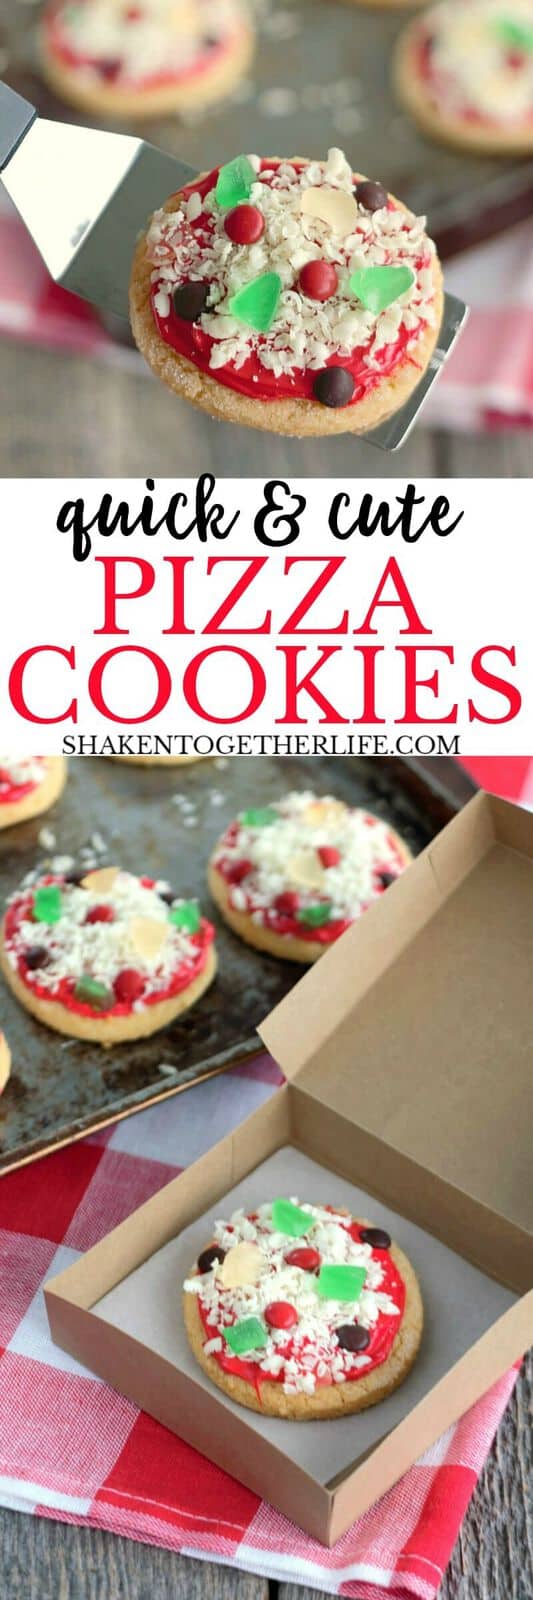 No Bake Sugar Cookie Pizza Cookies - these are the cutest cookies! Love all the sweet toppings loaded on a sugar cookie crust!